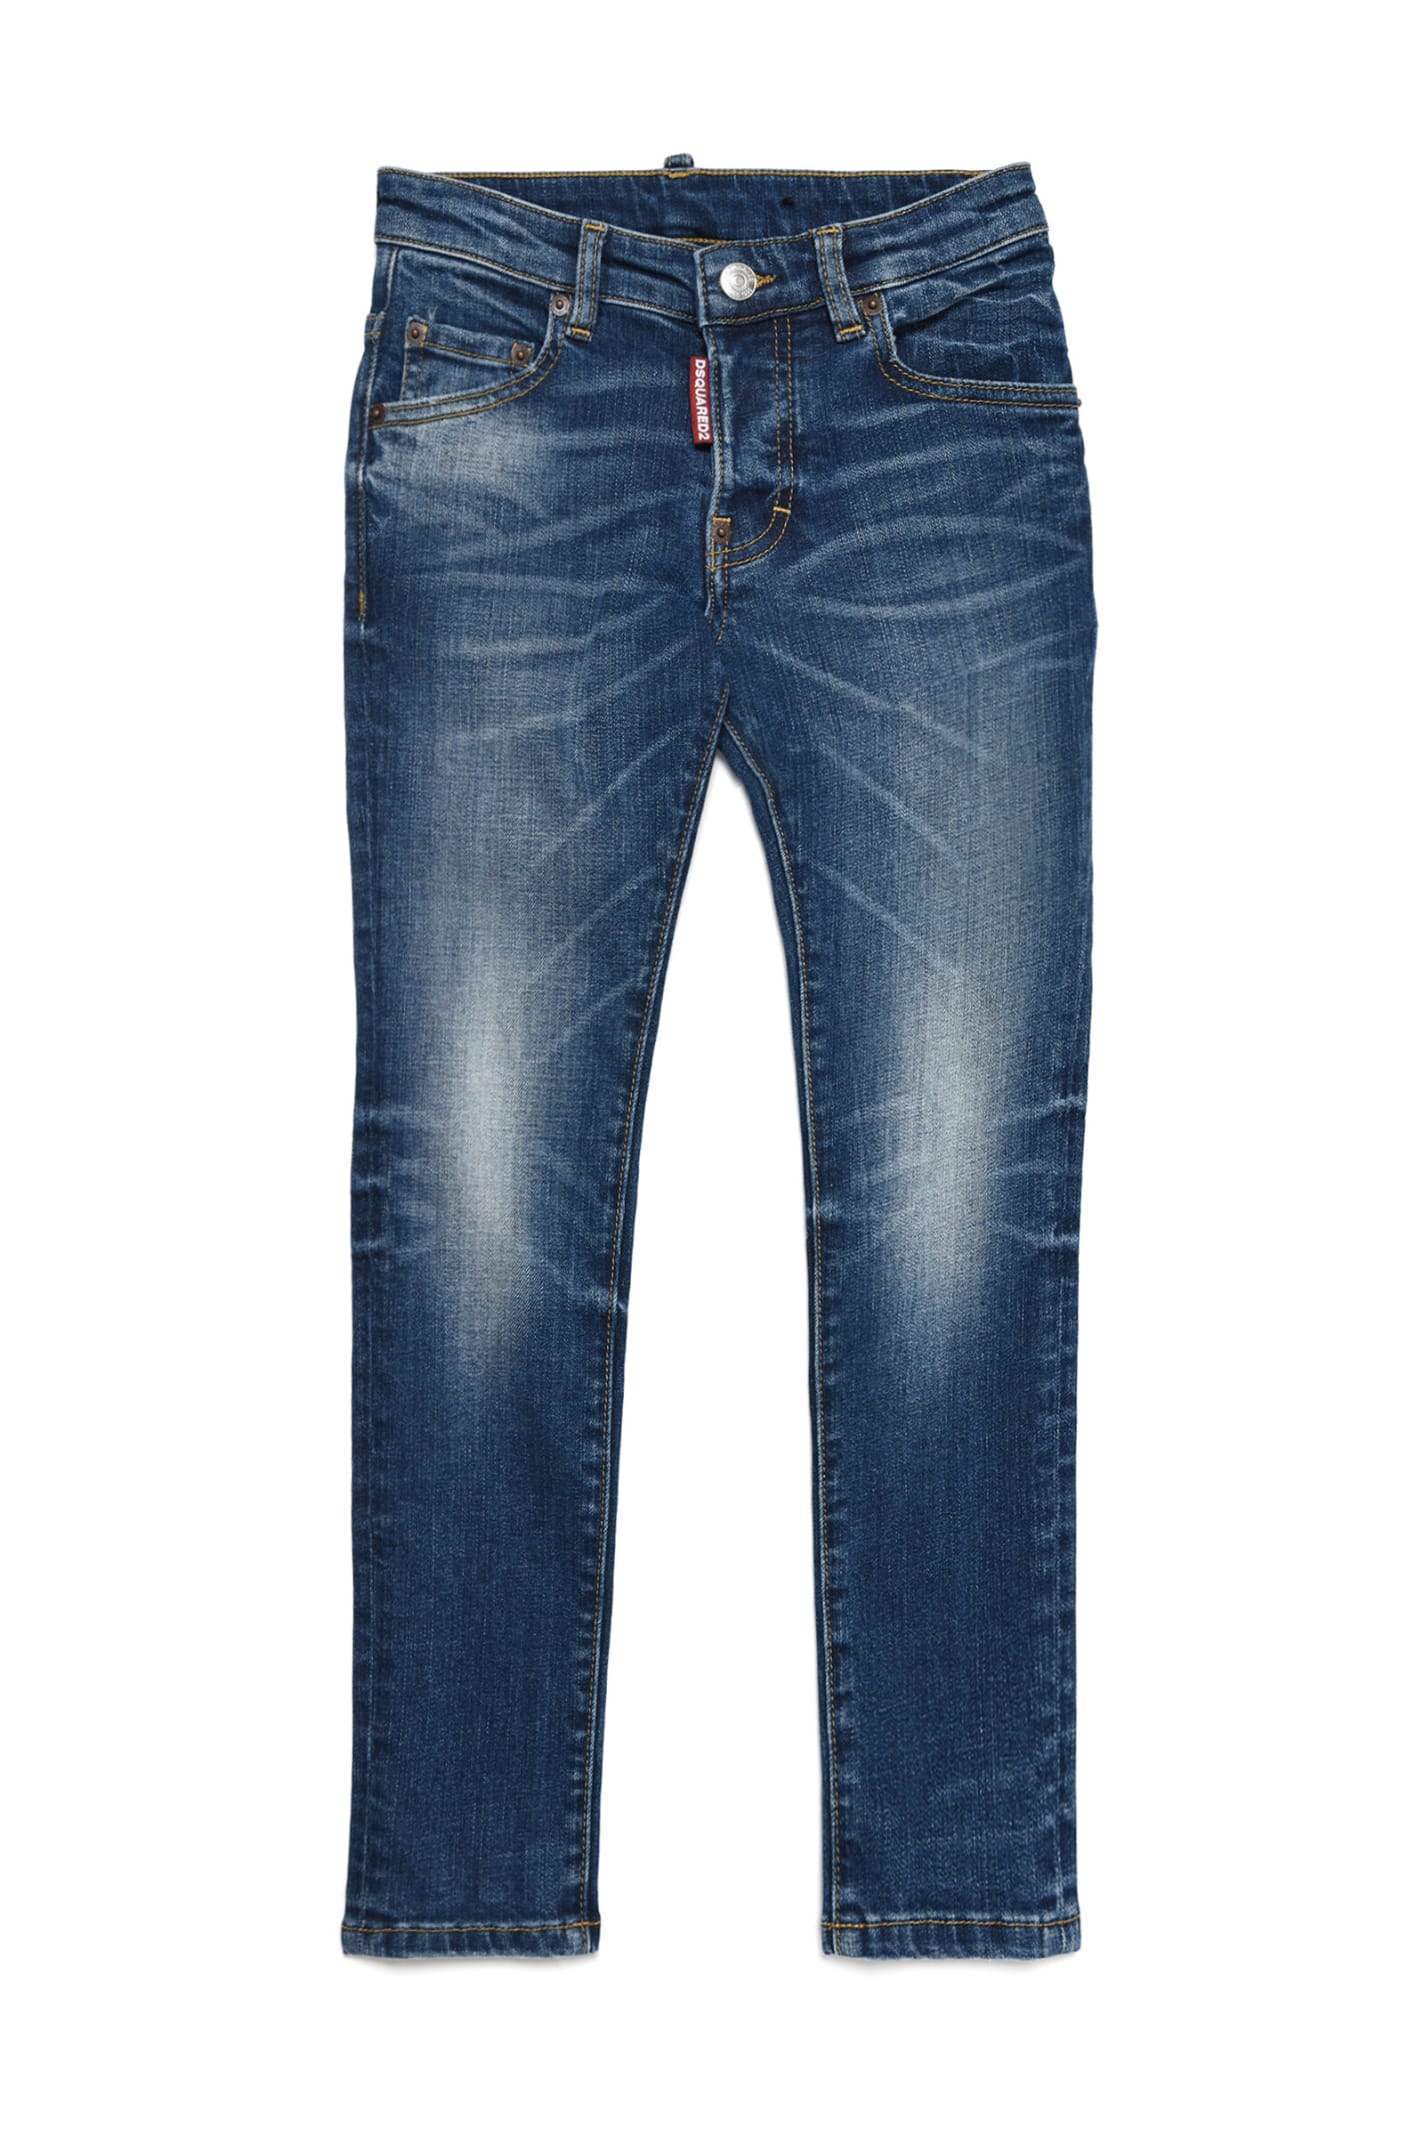 Dsquared2 D2p118lm Skater Jean Trousers Dsquared